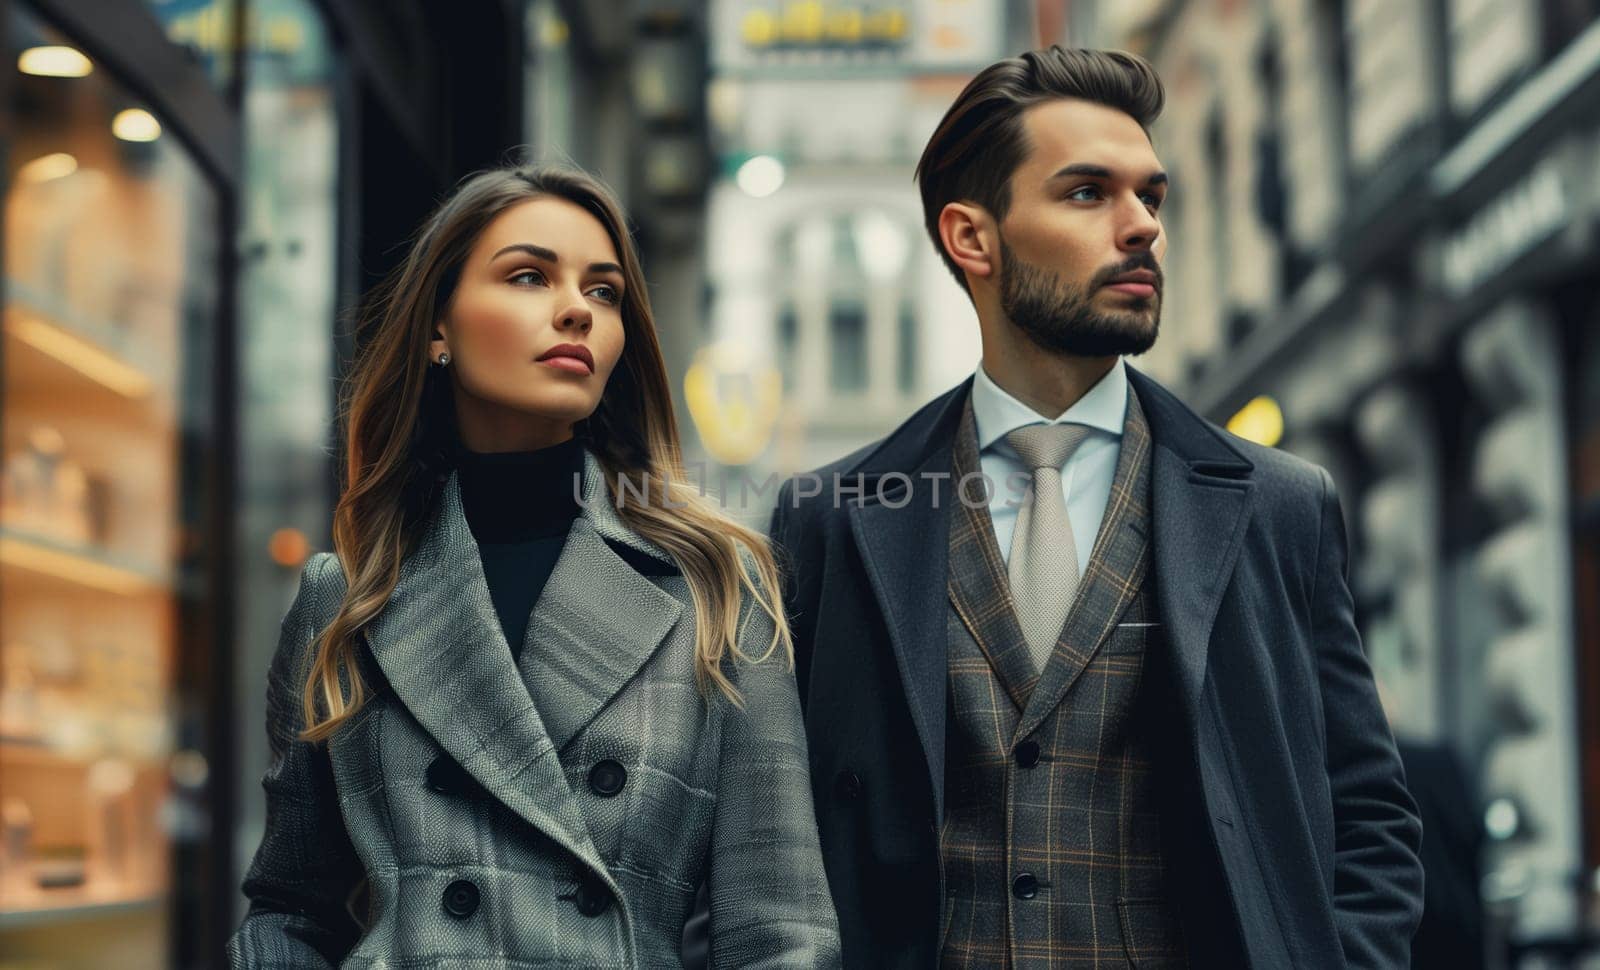 Fashionable portrait of stylish beautiful woman and man in suit, modern young couple posing together on city street